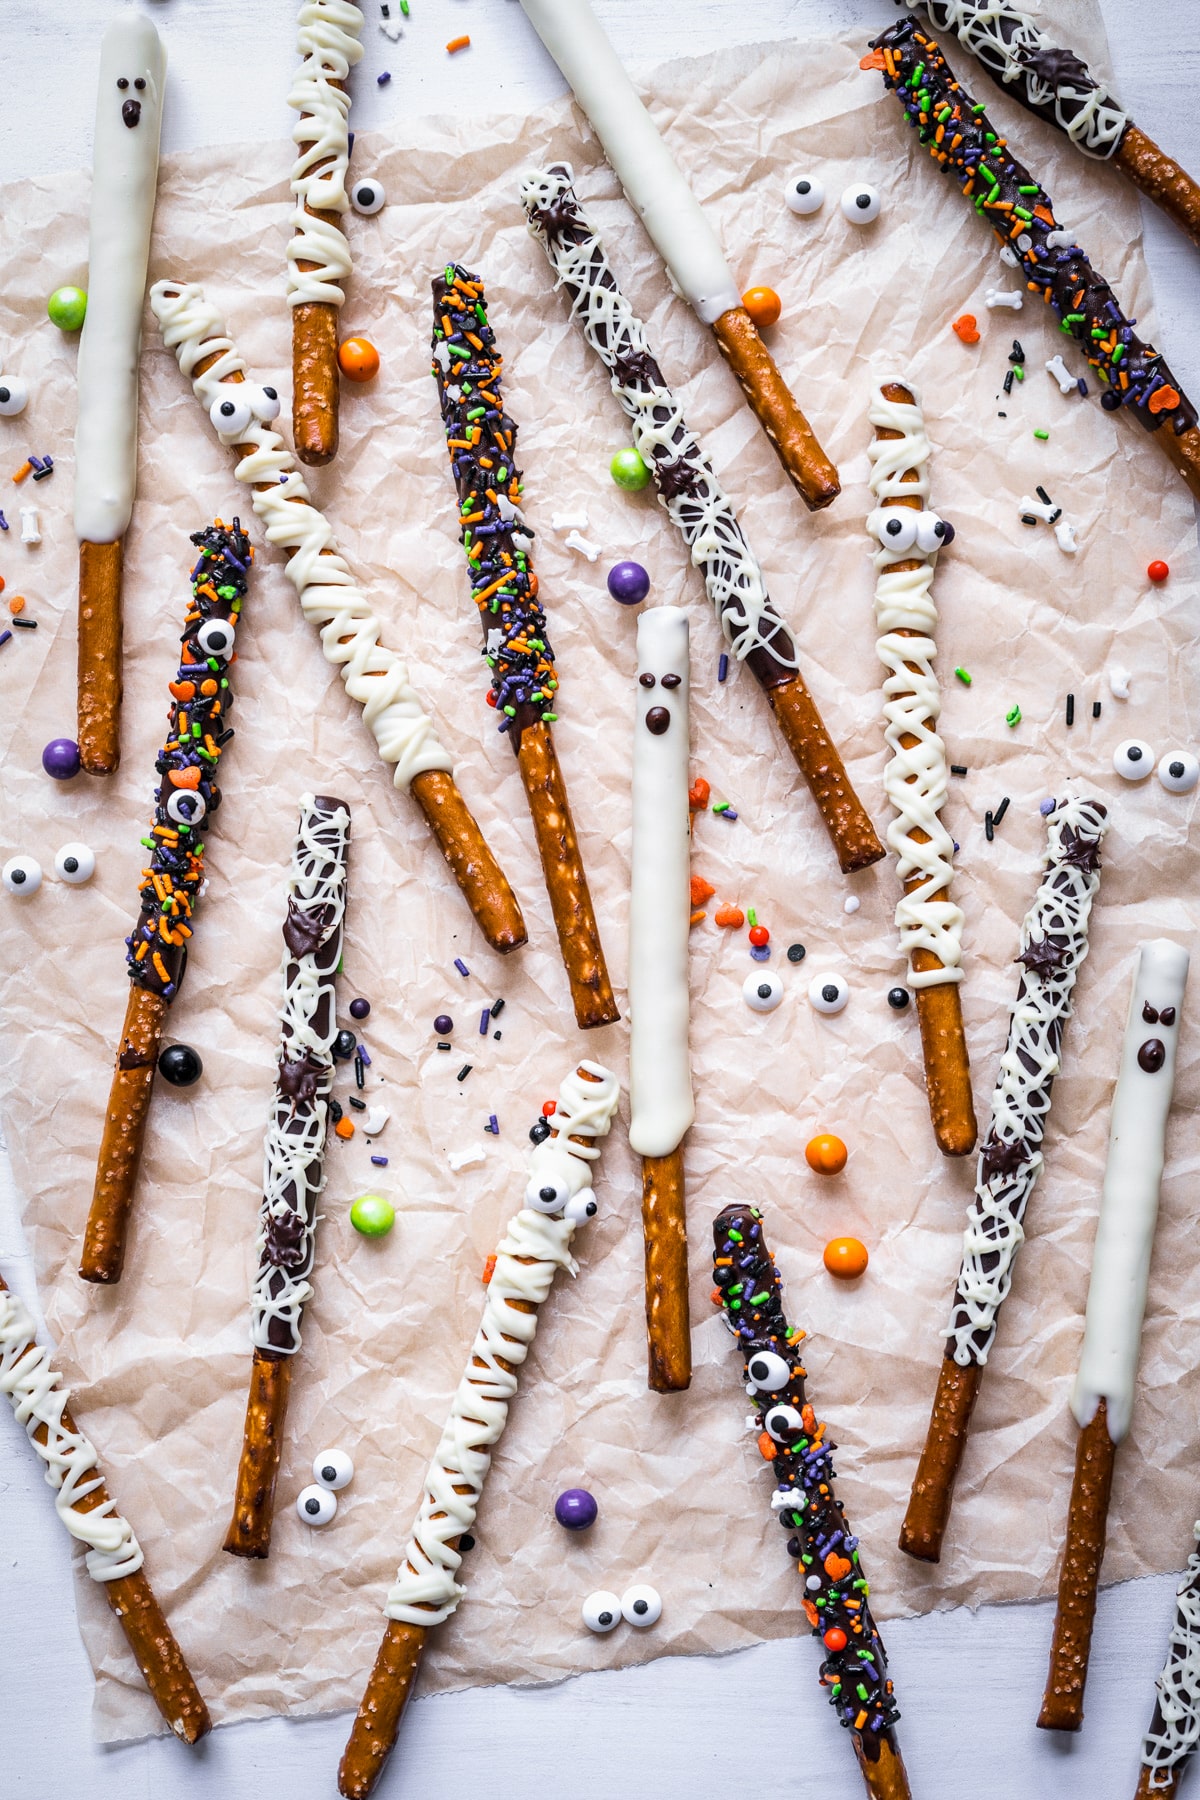 Overhead of finished Halloween Chocolate Pretzel Rods on parchment paper in all forms.